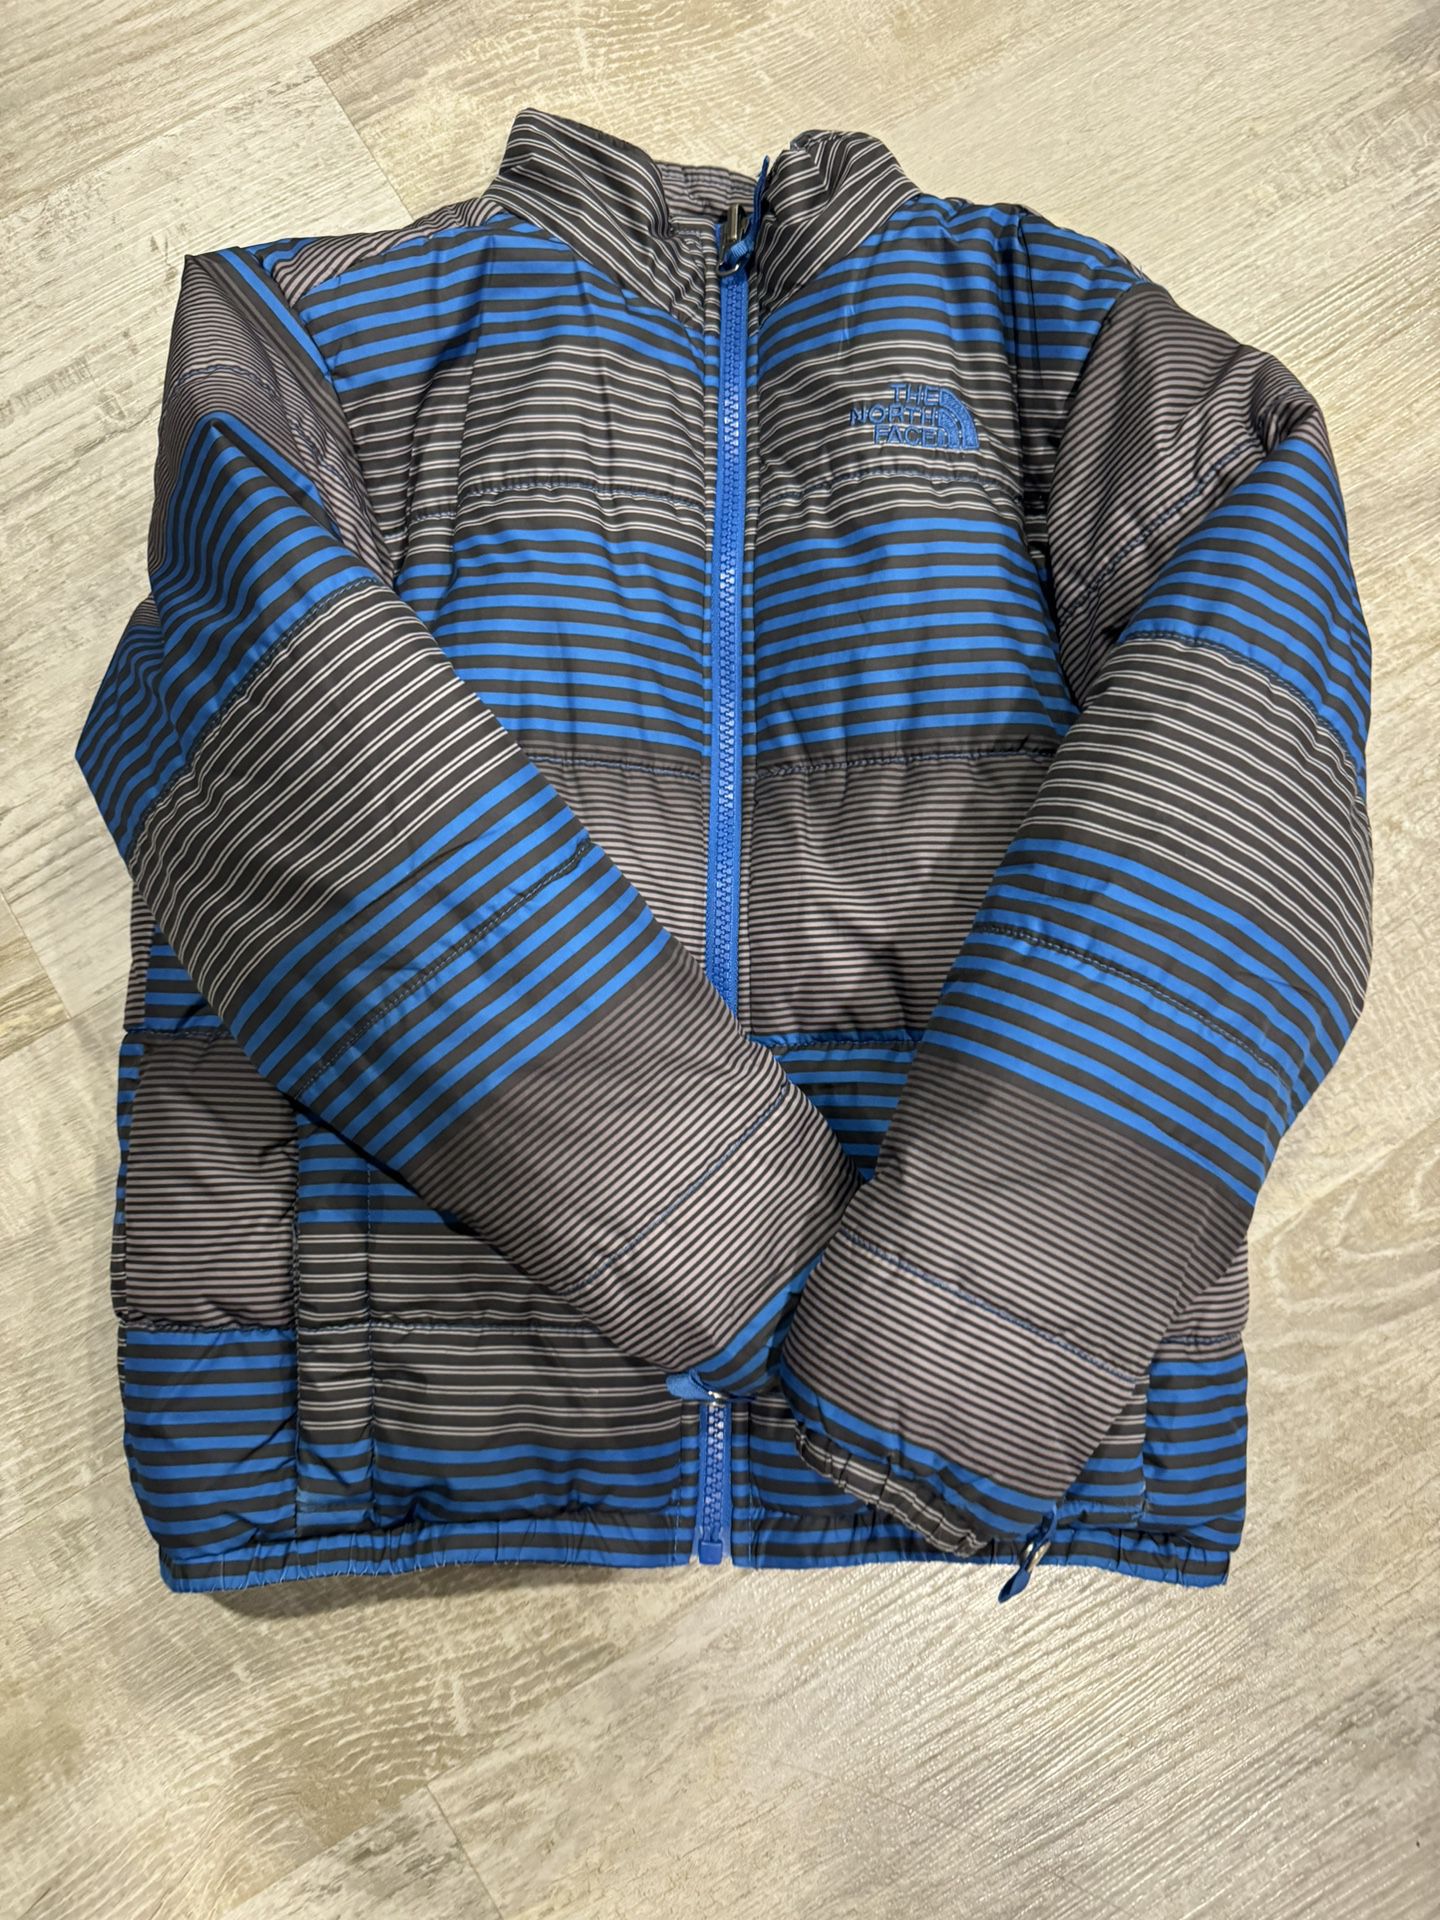 The North Face Boys Jacket Size 7/8